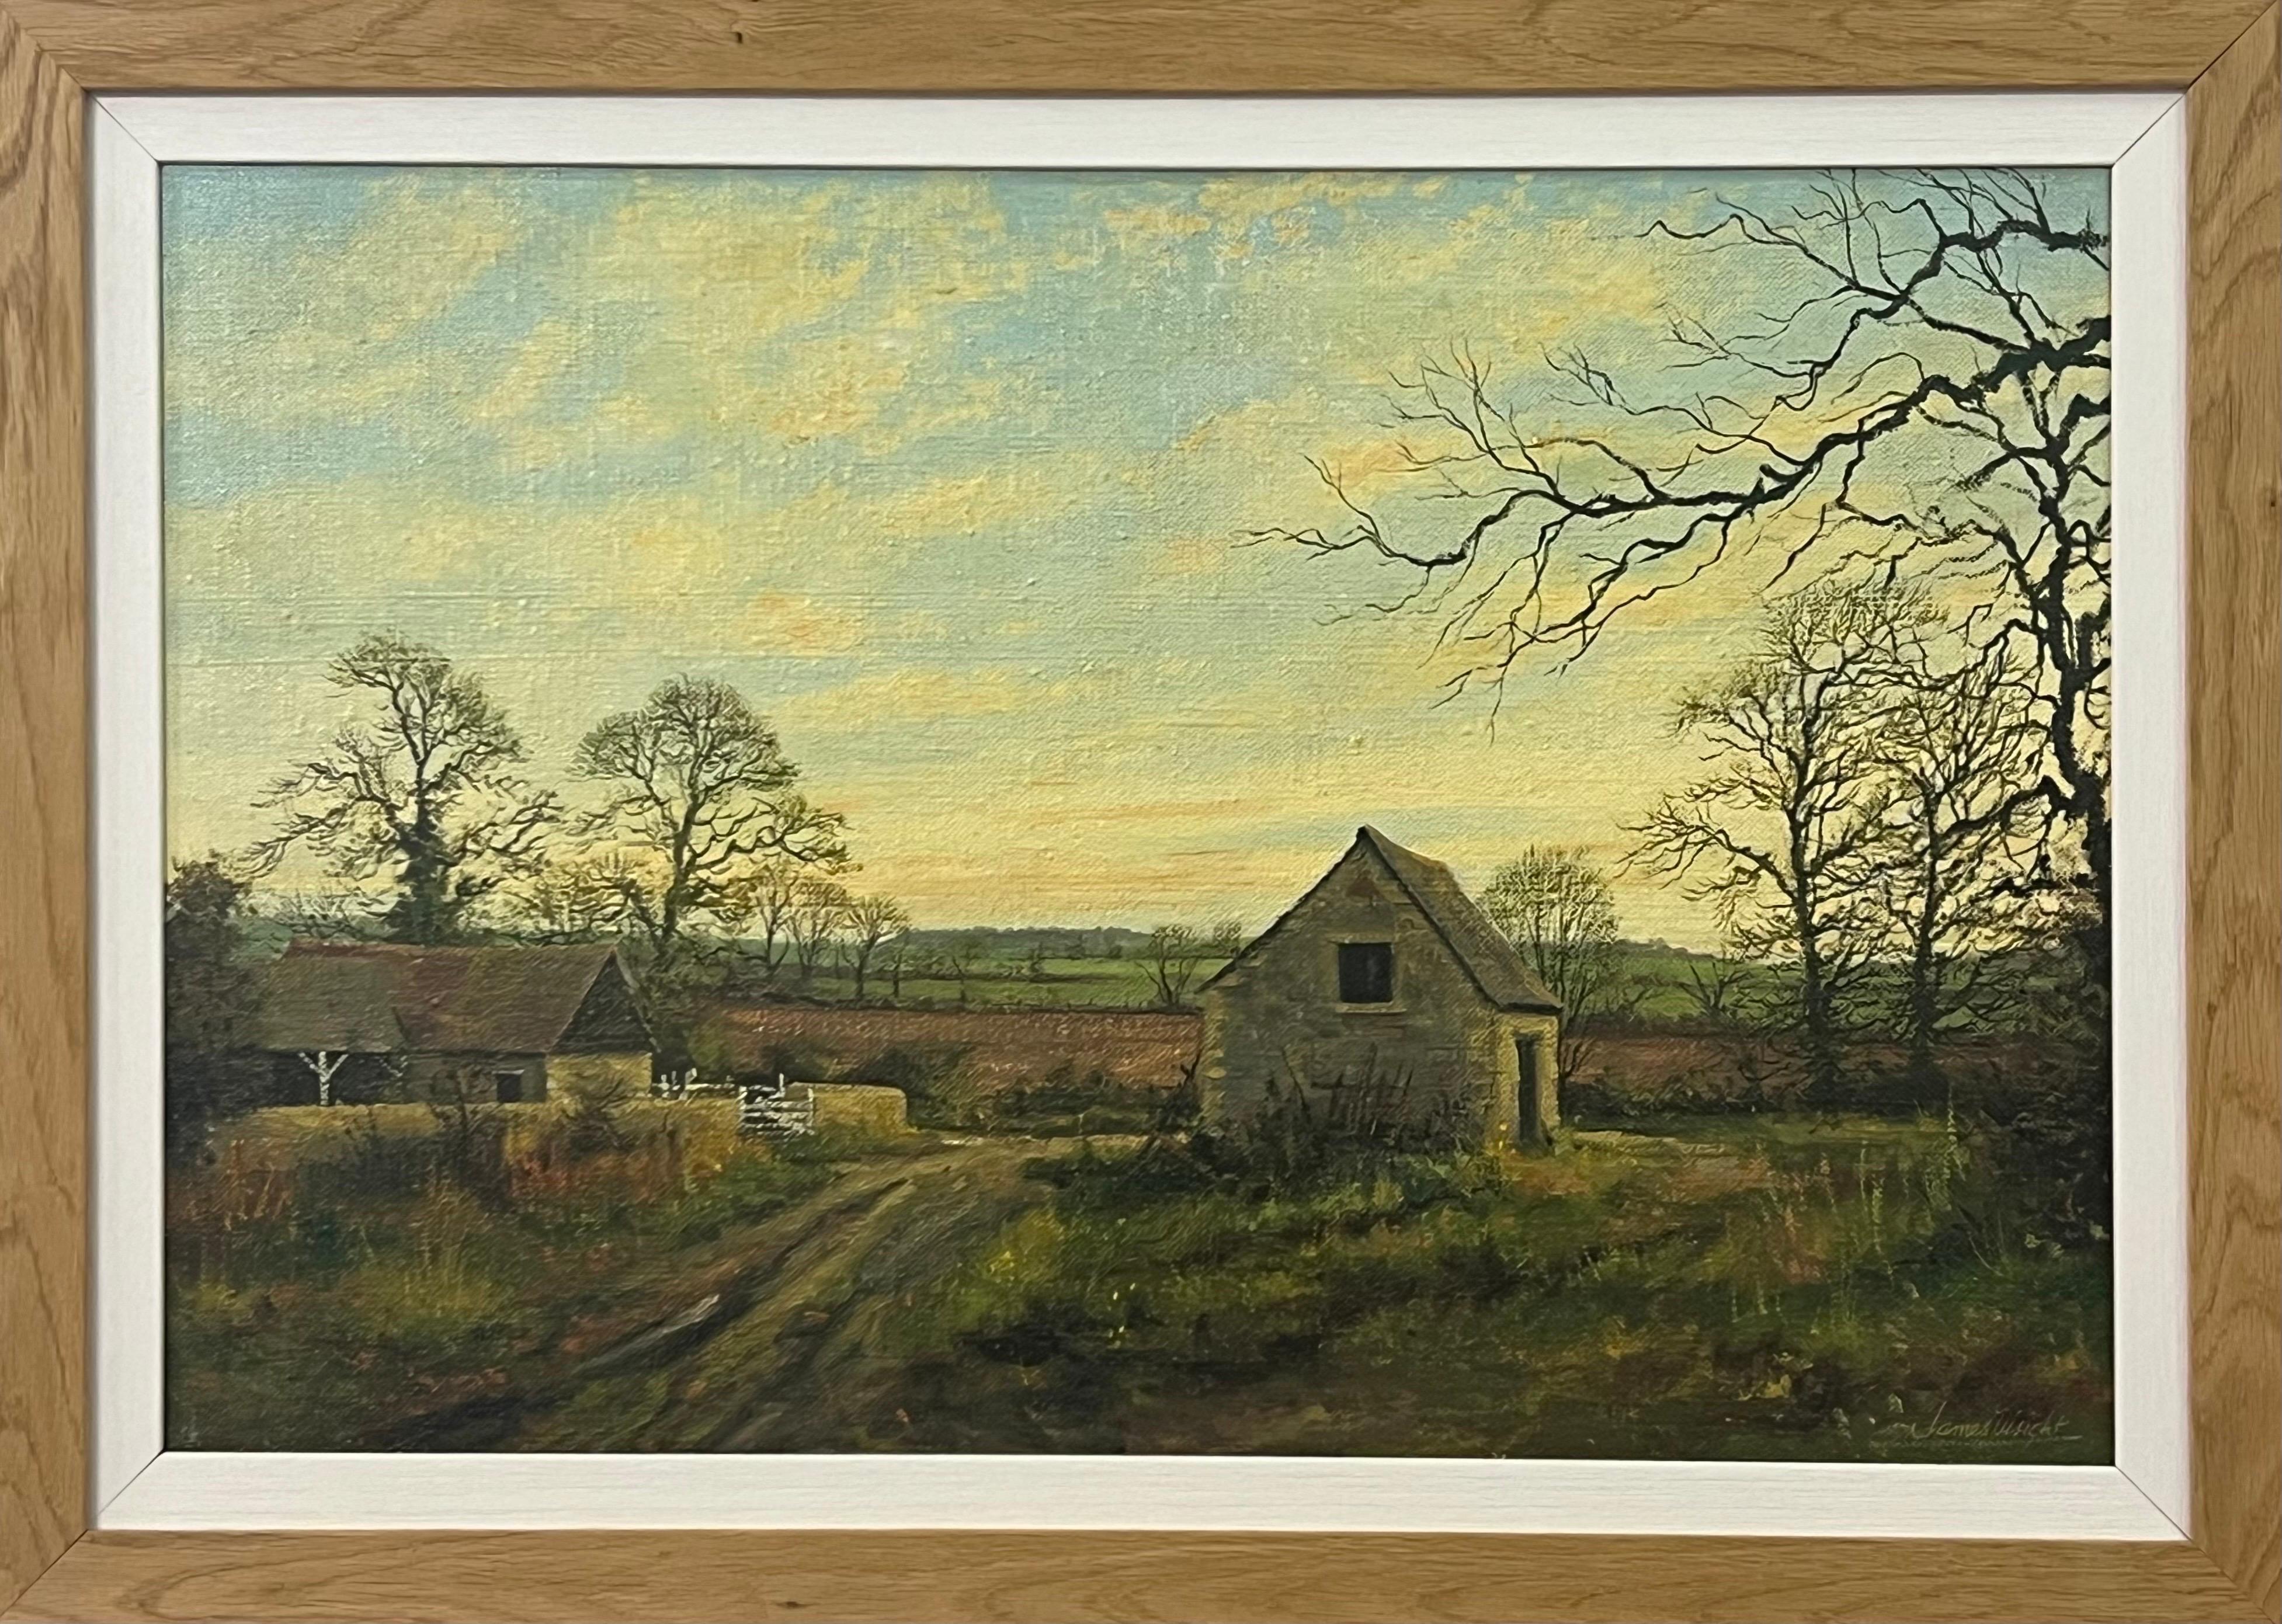 James Wright Figurative Painting - Old Barn Scene of a Farm in the English Countryside by British Landscape Artist